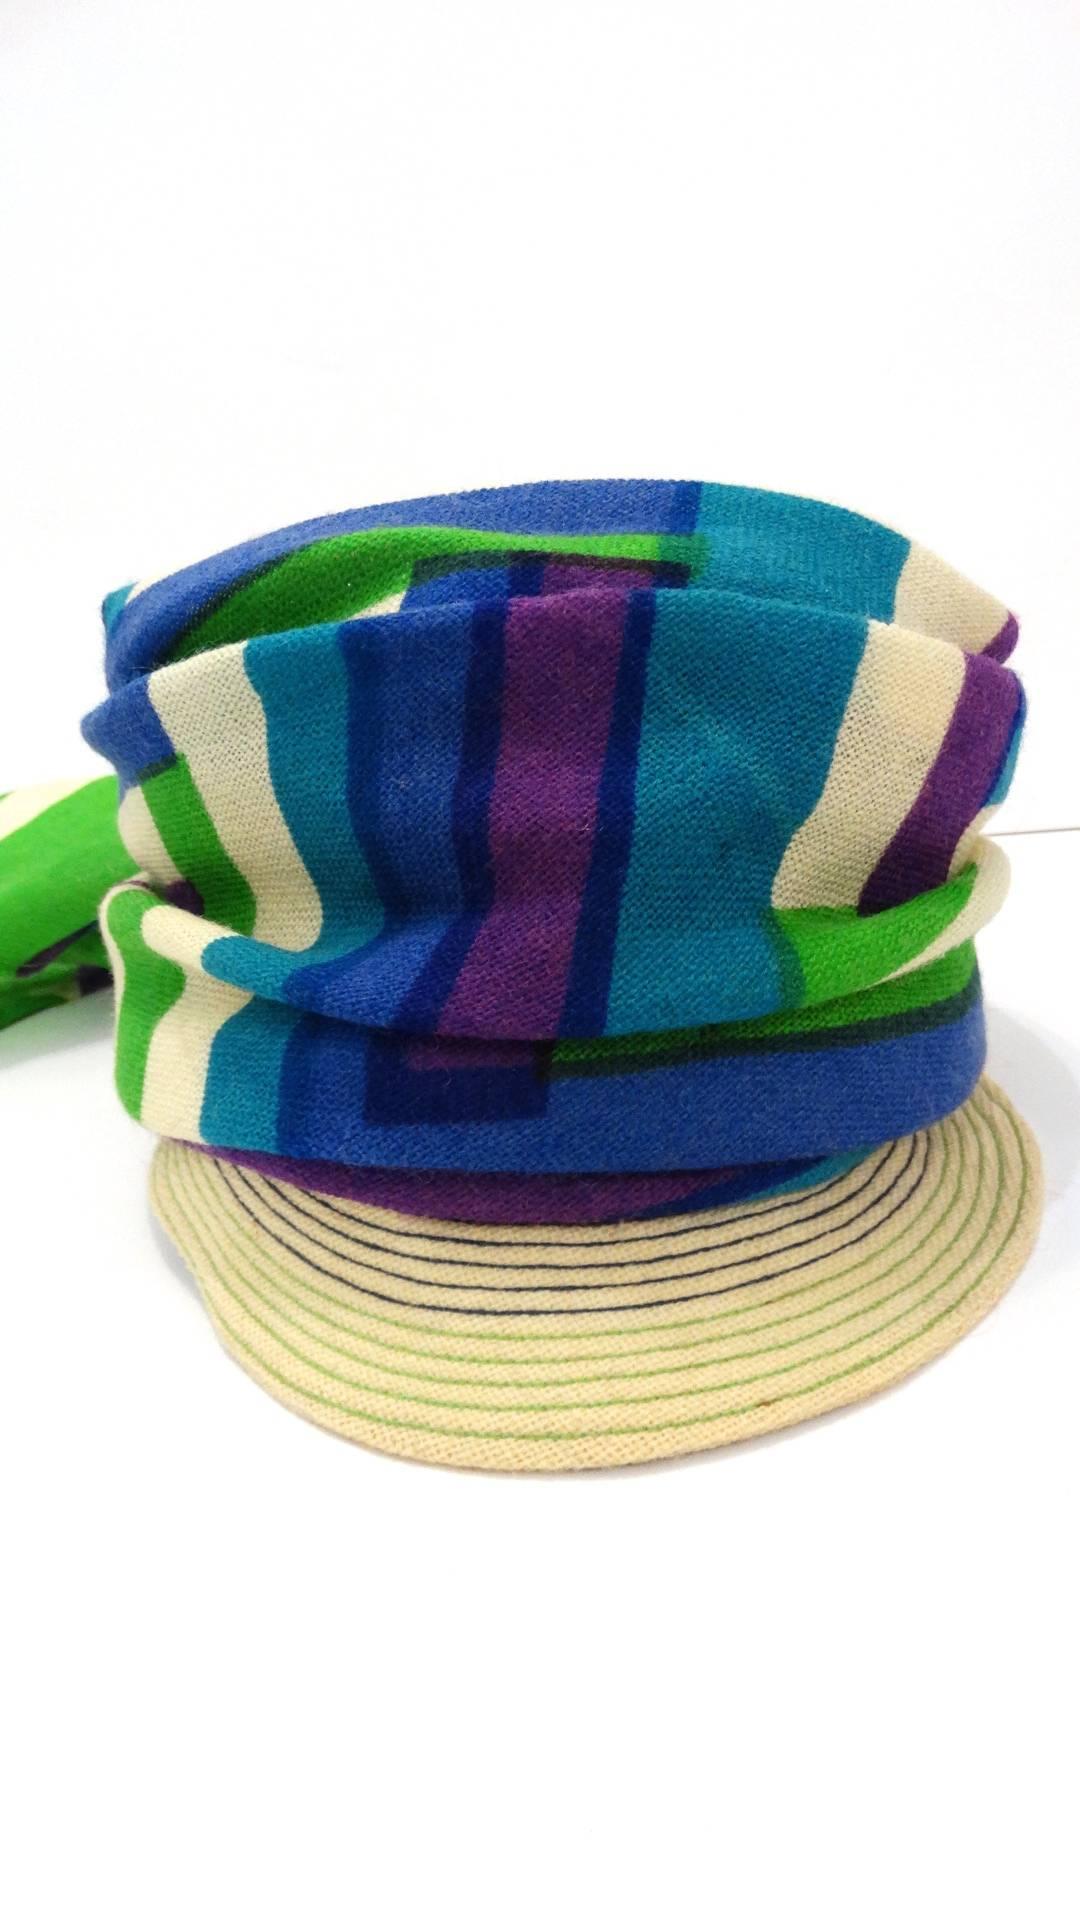 Your perfect summer hat has arrived- with our amazing 1960s Yves Saint Laurent headscarf hat! Woven straw brim with purple and green stitching. Wrapped with blue, violet and green striped scarf, knotted at the back. Lined with grey fabric and